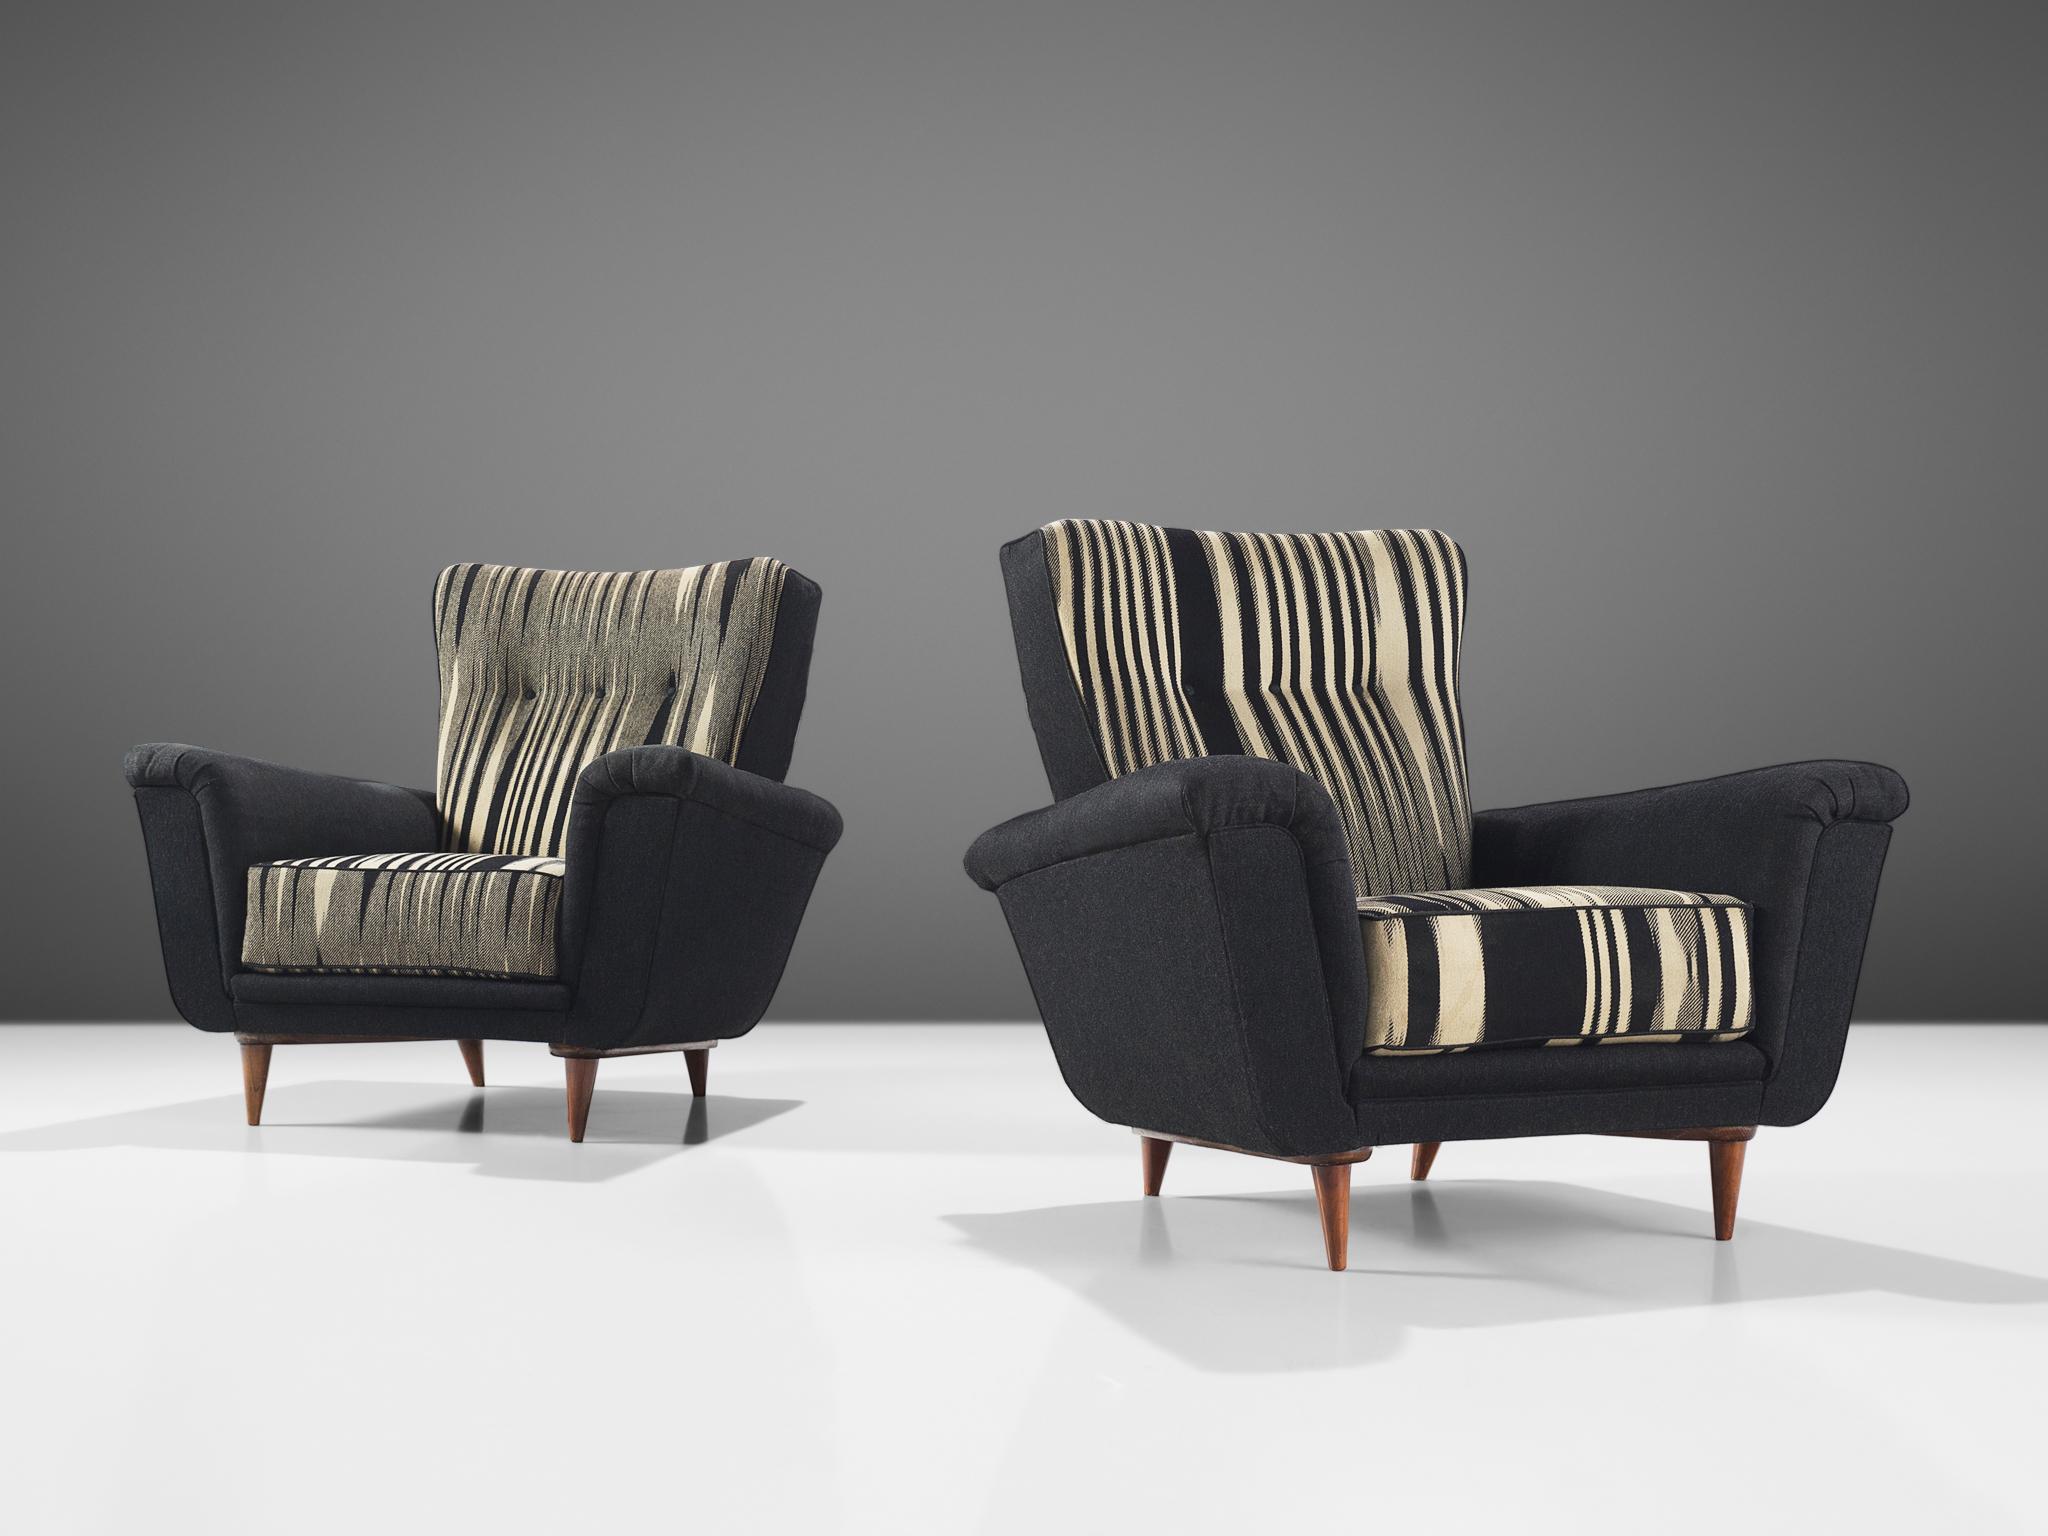 Theo Ruth for Artifort, pair of easy chairs, in original black and white fabric, wood, The Netherlands, 1950s.

This armchair is an iconic example of an Artifort piece furniture designed by Theo Ruth in the 1950s. The lounge chair is on the one